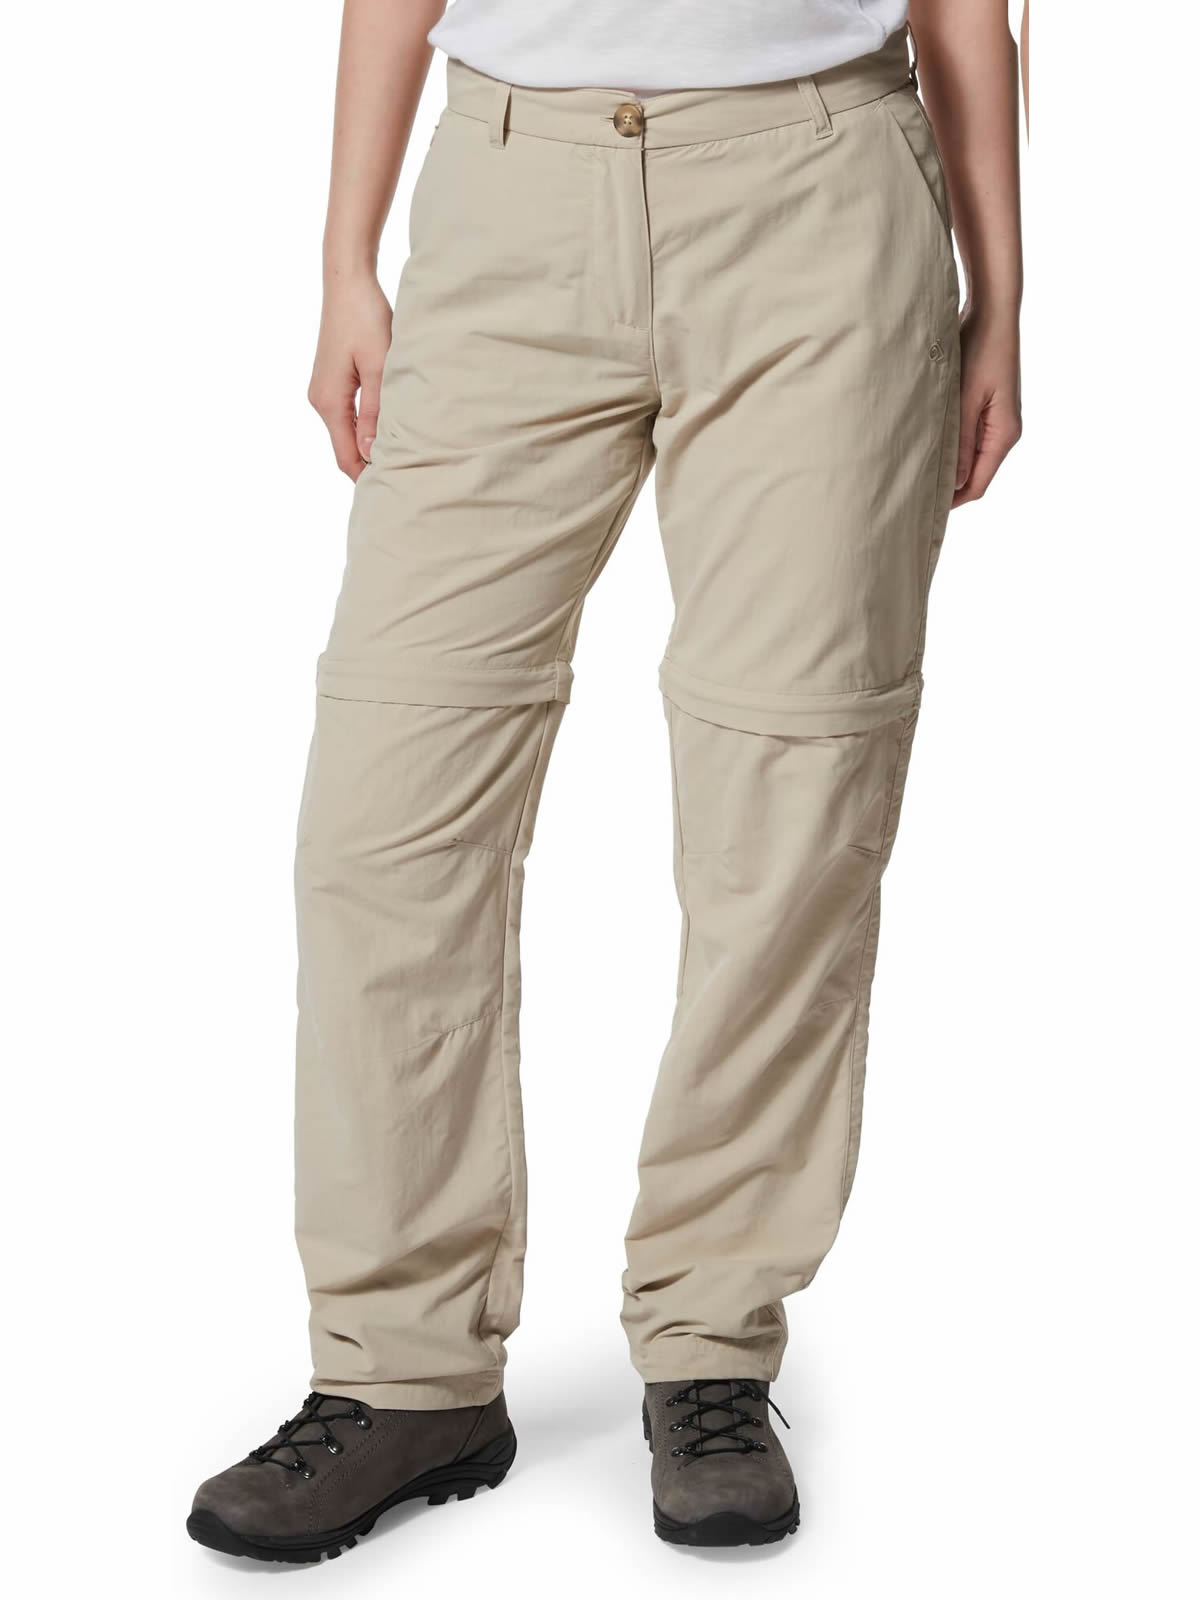 cwj1214 craghoppers nosilife convertible trousers desert sand front